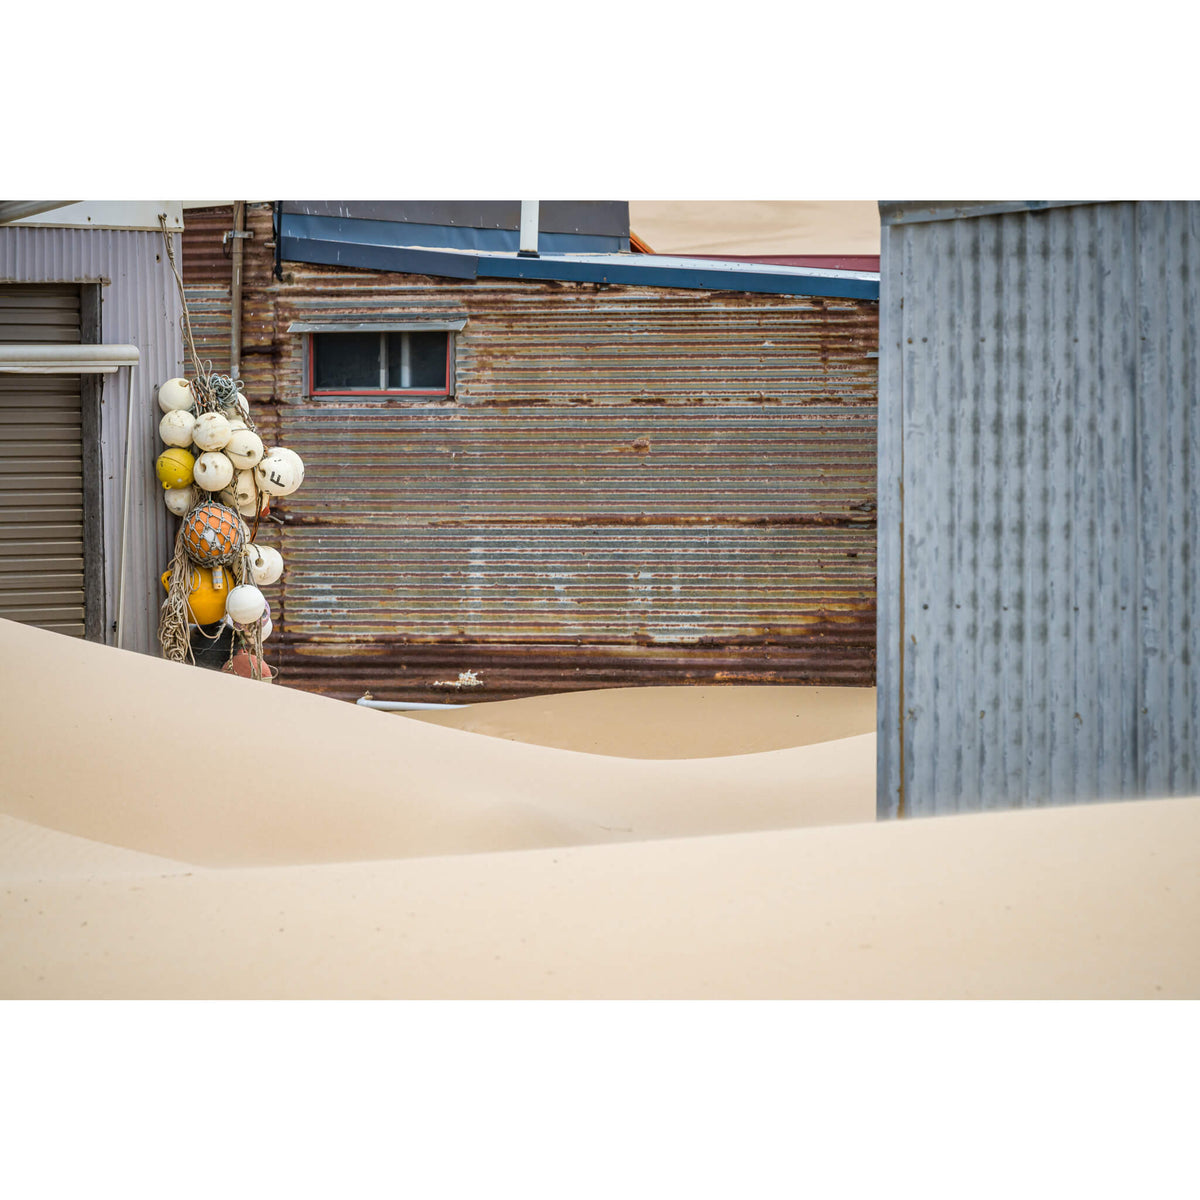 The Alleyway | Tin City Fine Art Print - Lost Collective Shop